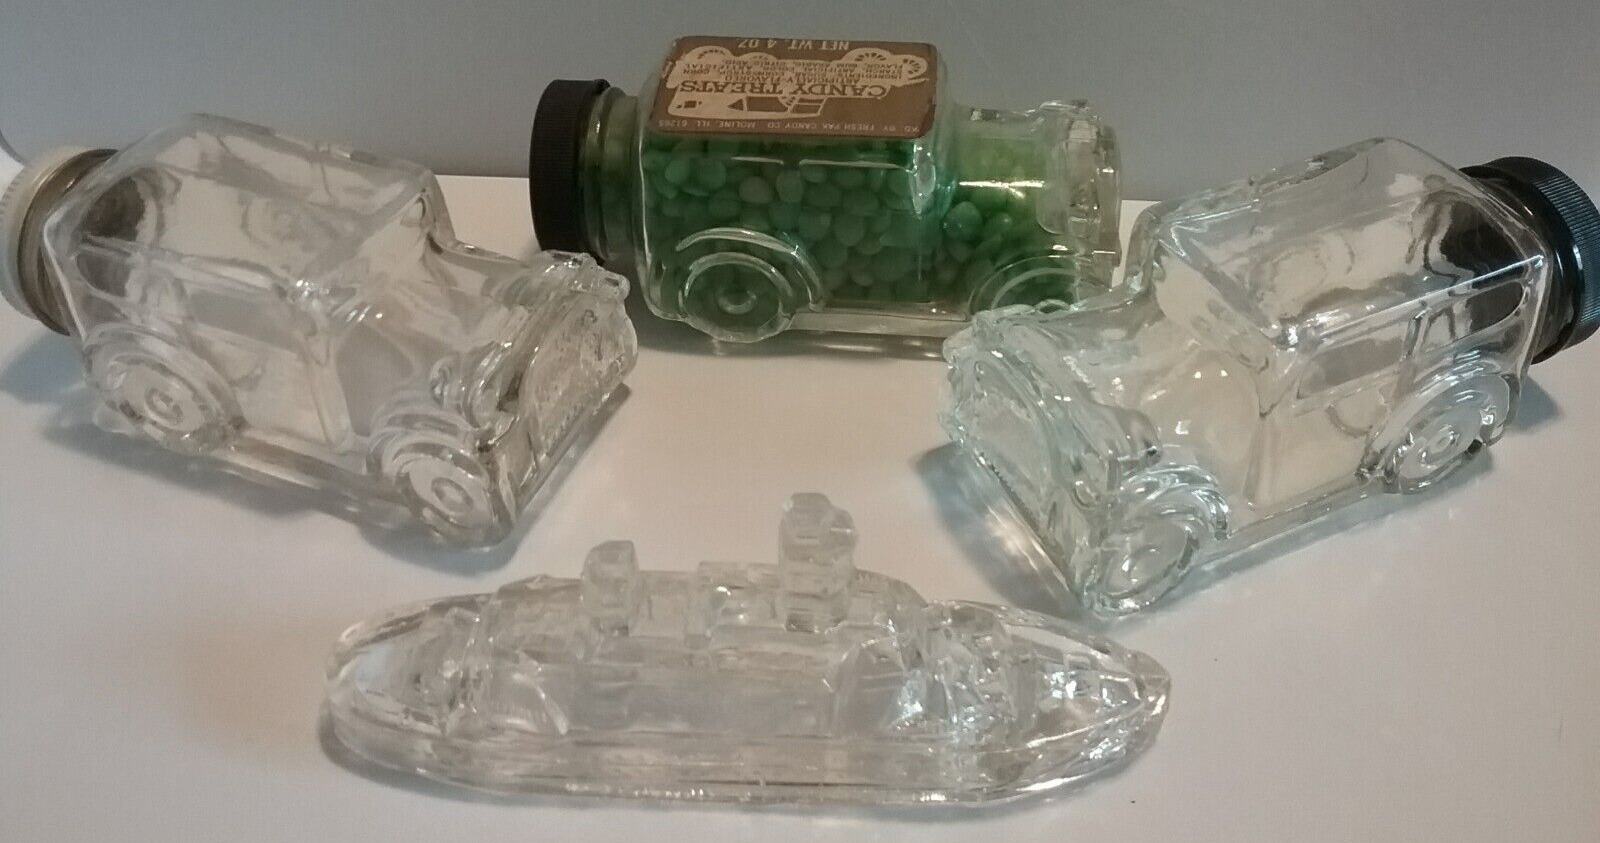 4 Vintage Glass Candy Containers, Touring Car Autos, Battleship, 1 orig label